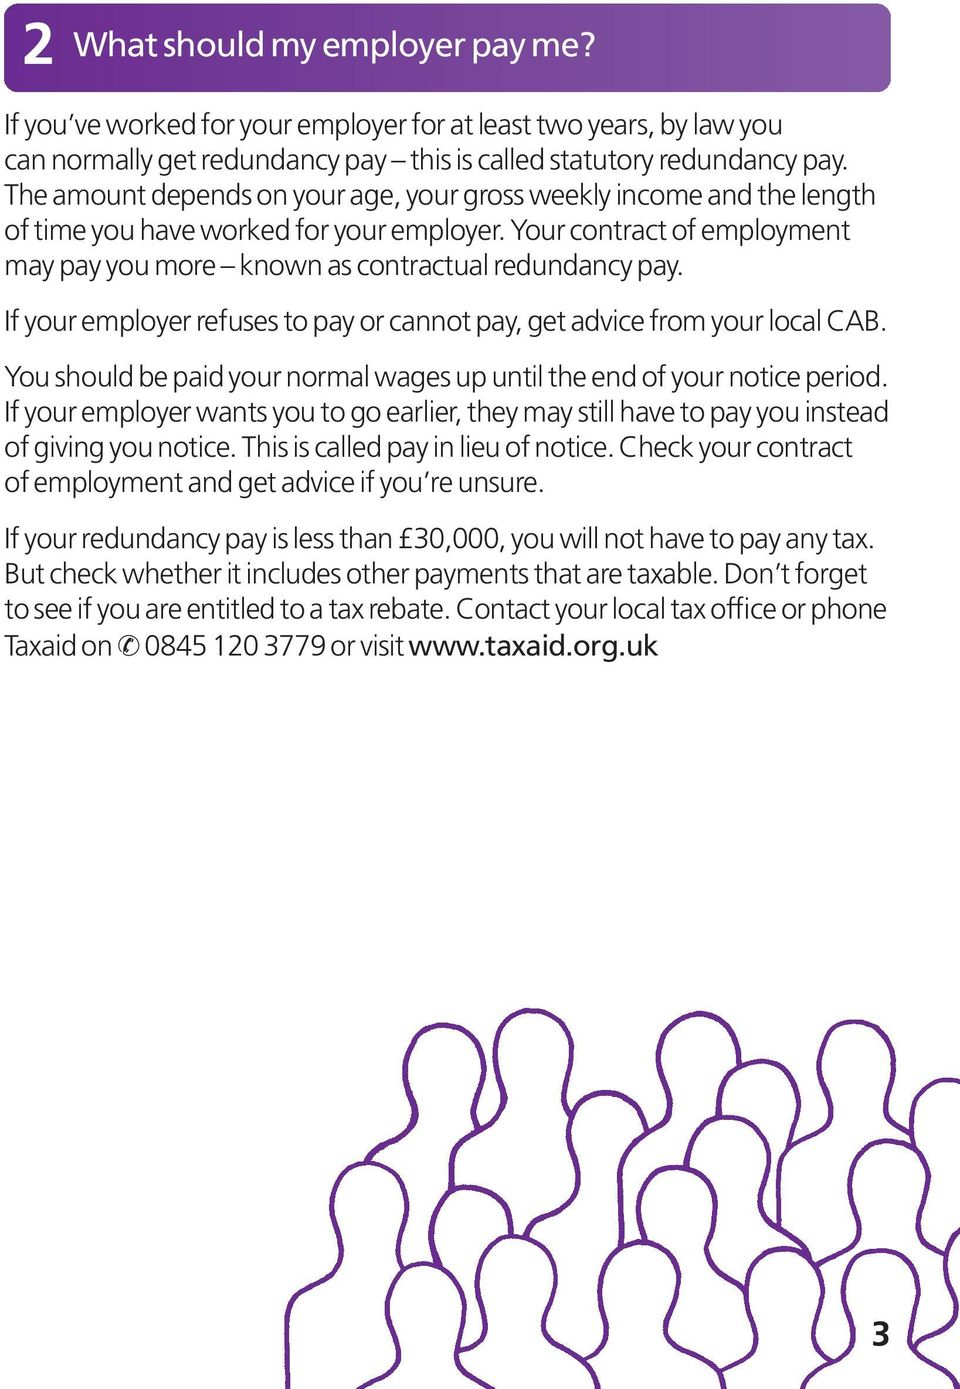 If your employer refuses to pay or cannot pay, get advice from your local CAB. You should be paid your normal wages up until the end of your notice period.